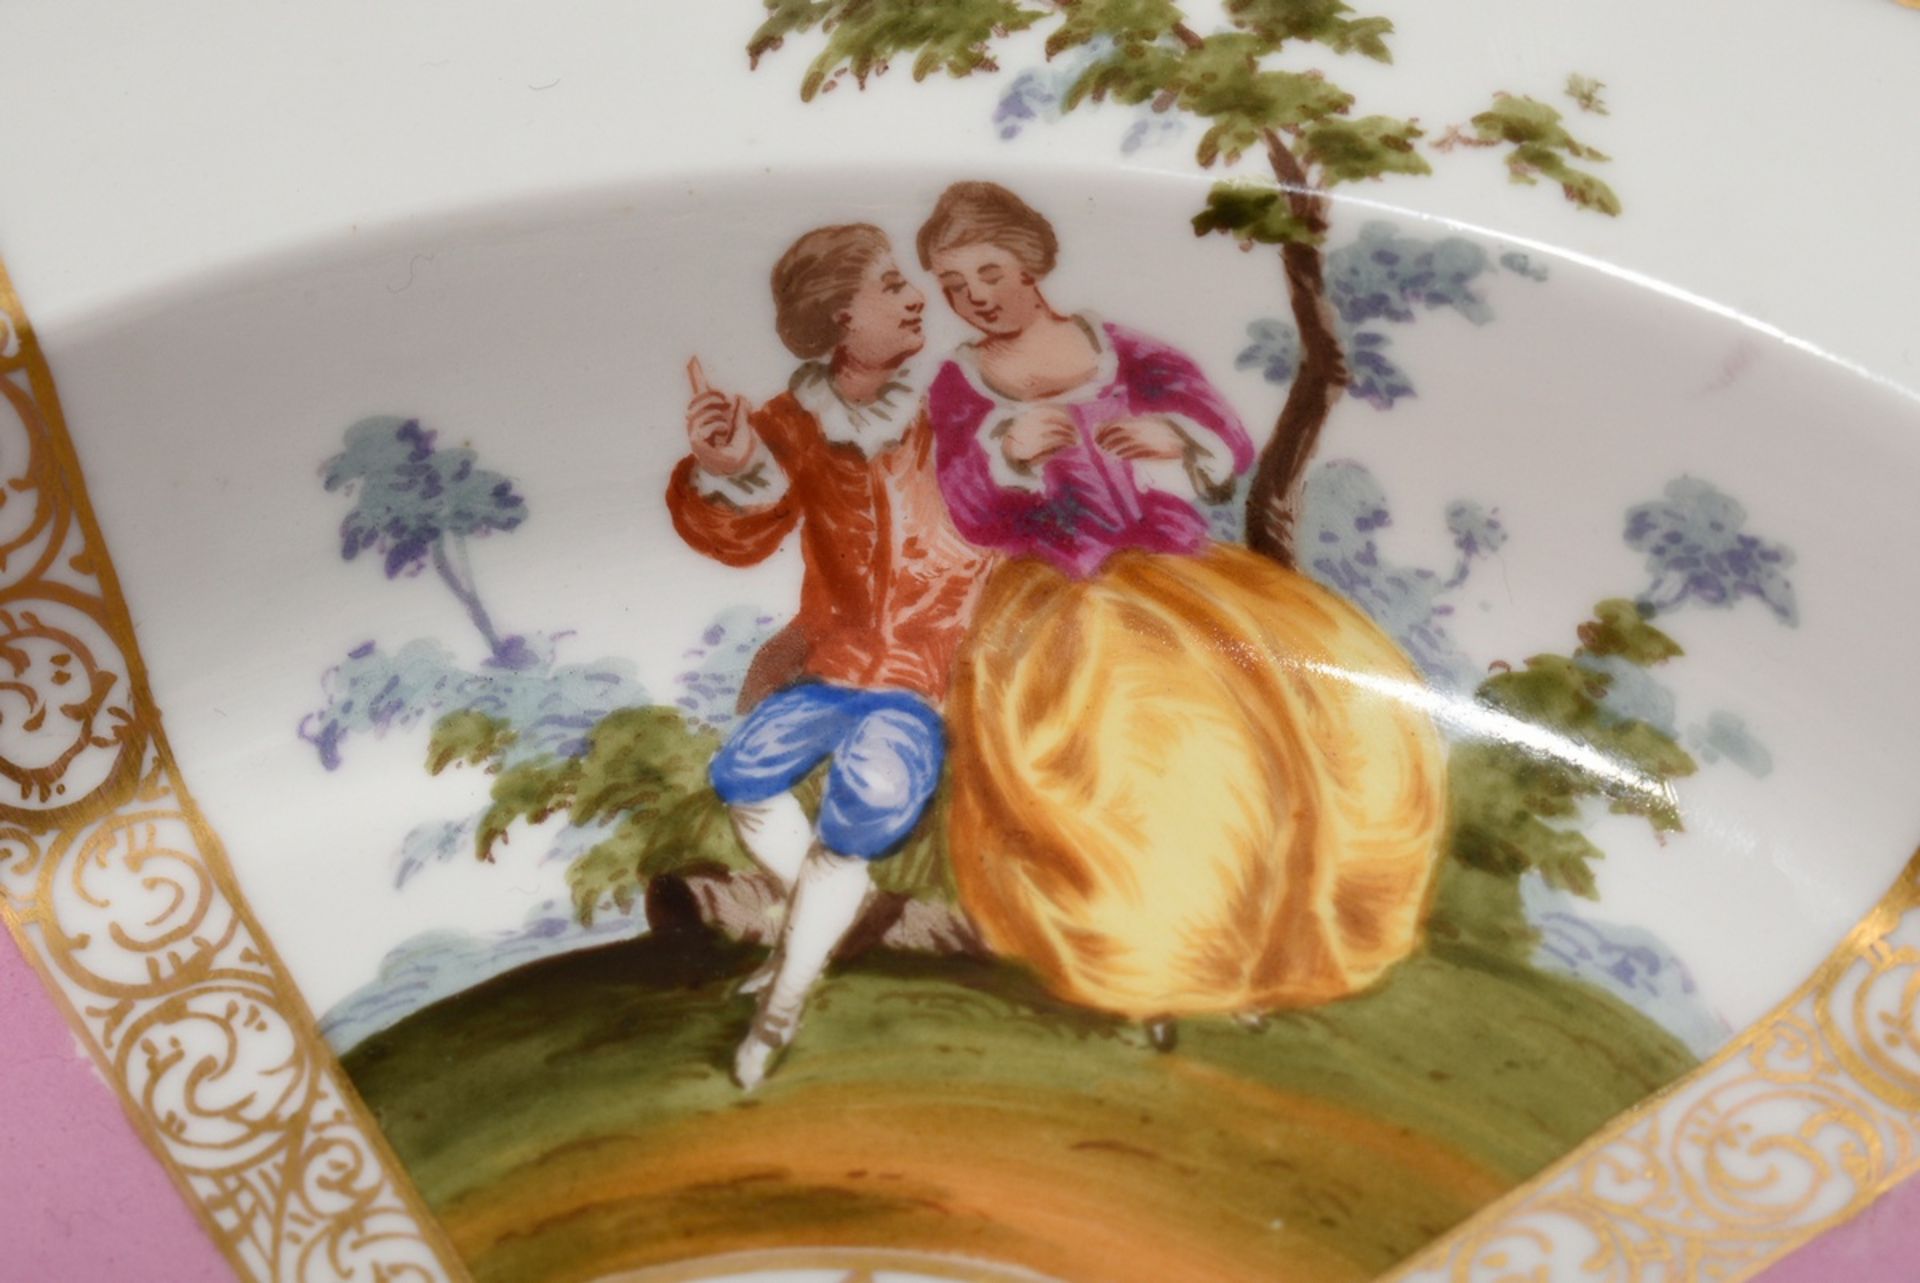 Meissen plate "Lovers" with watteau painting on rosé fond, probably house painting, Ø 23cm, 19th c. - Image 5 of 6